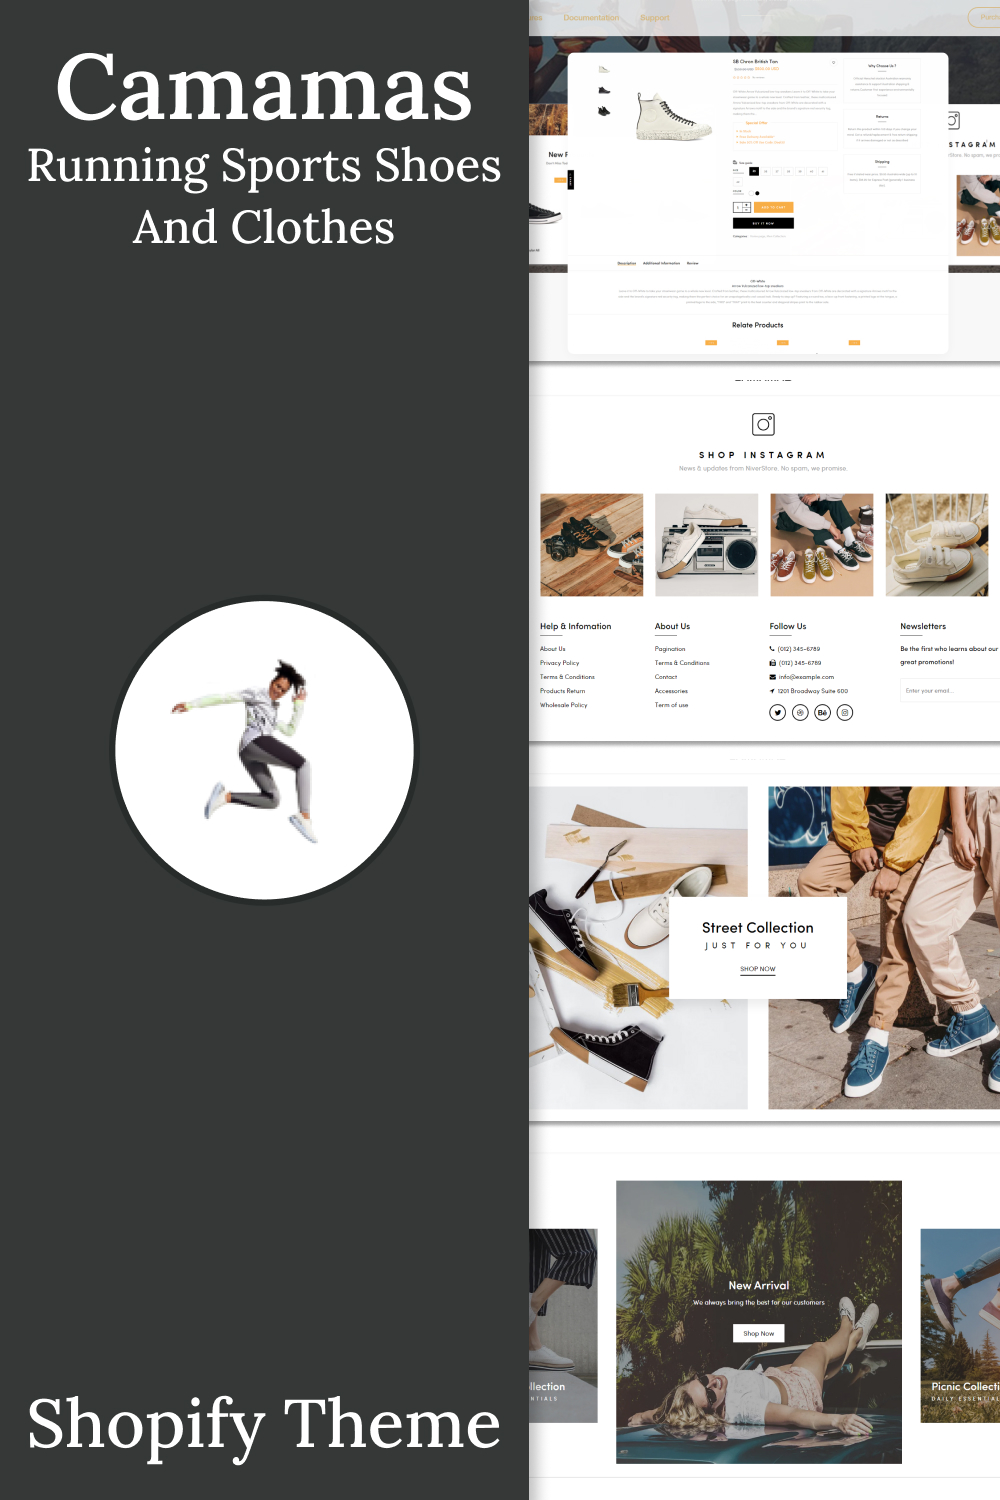 Pinterest illustrations of camamas running sports shoes clothes shopify theme.